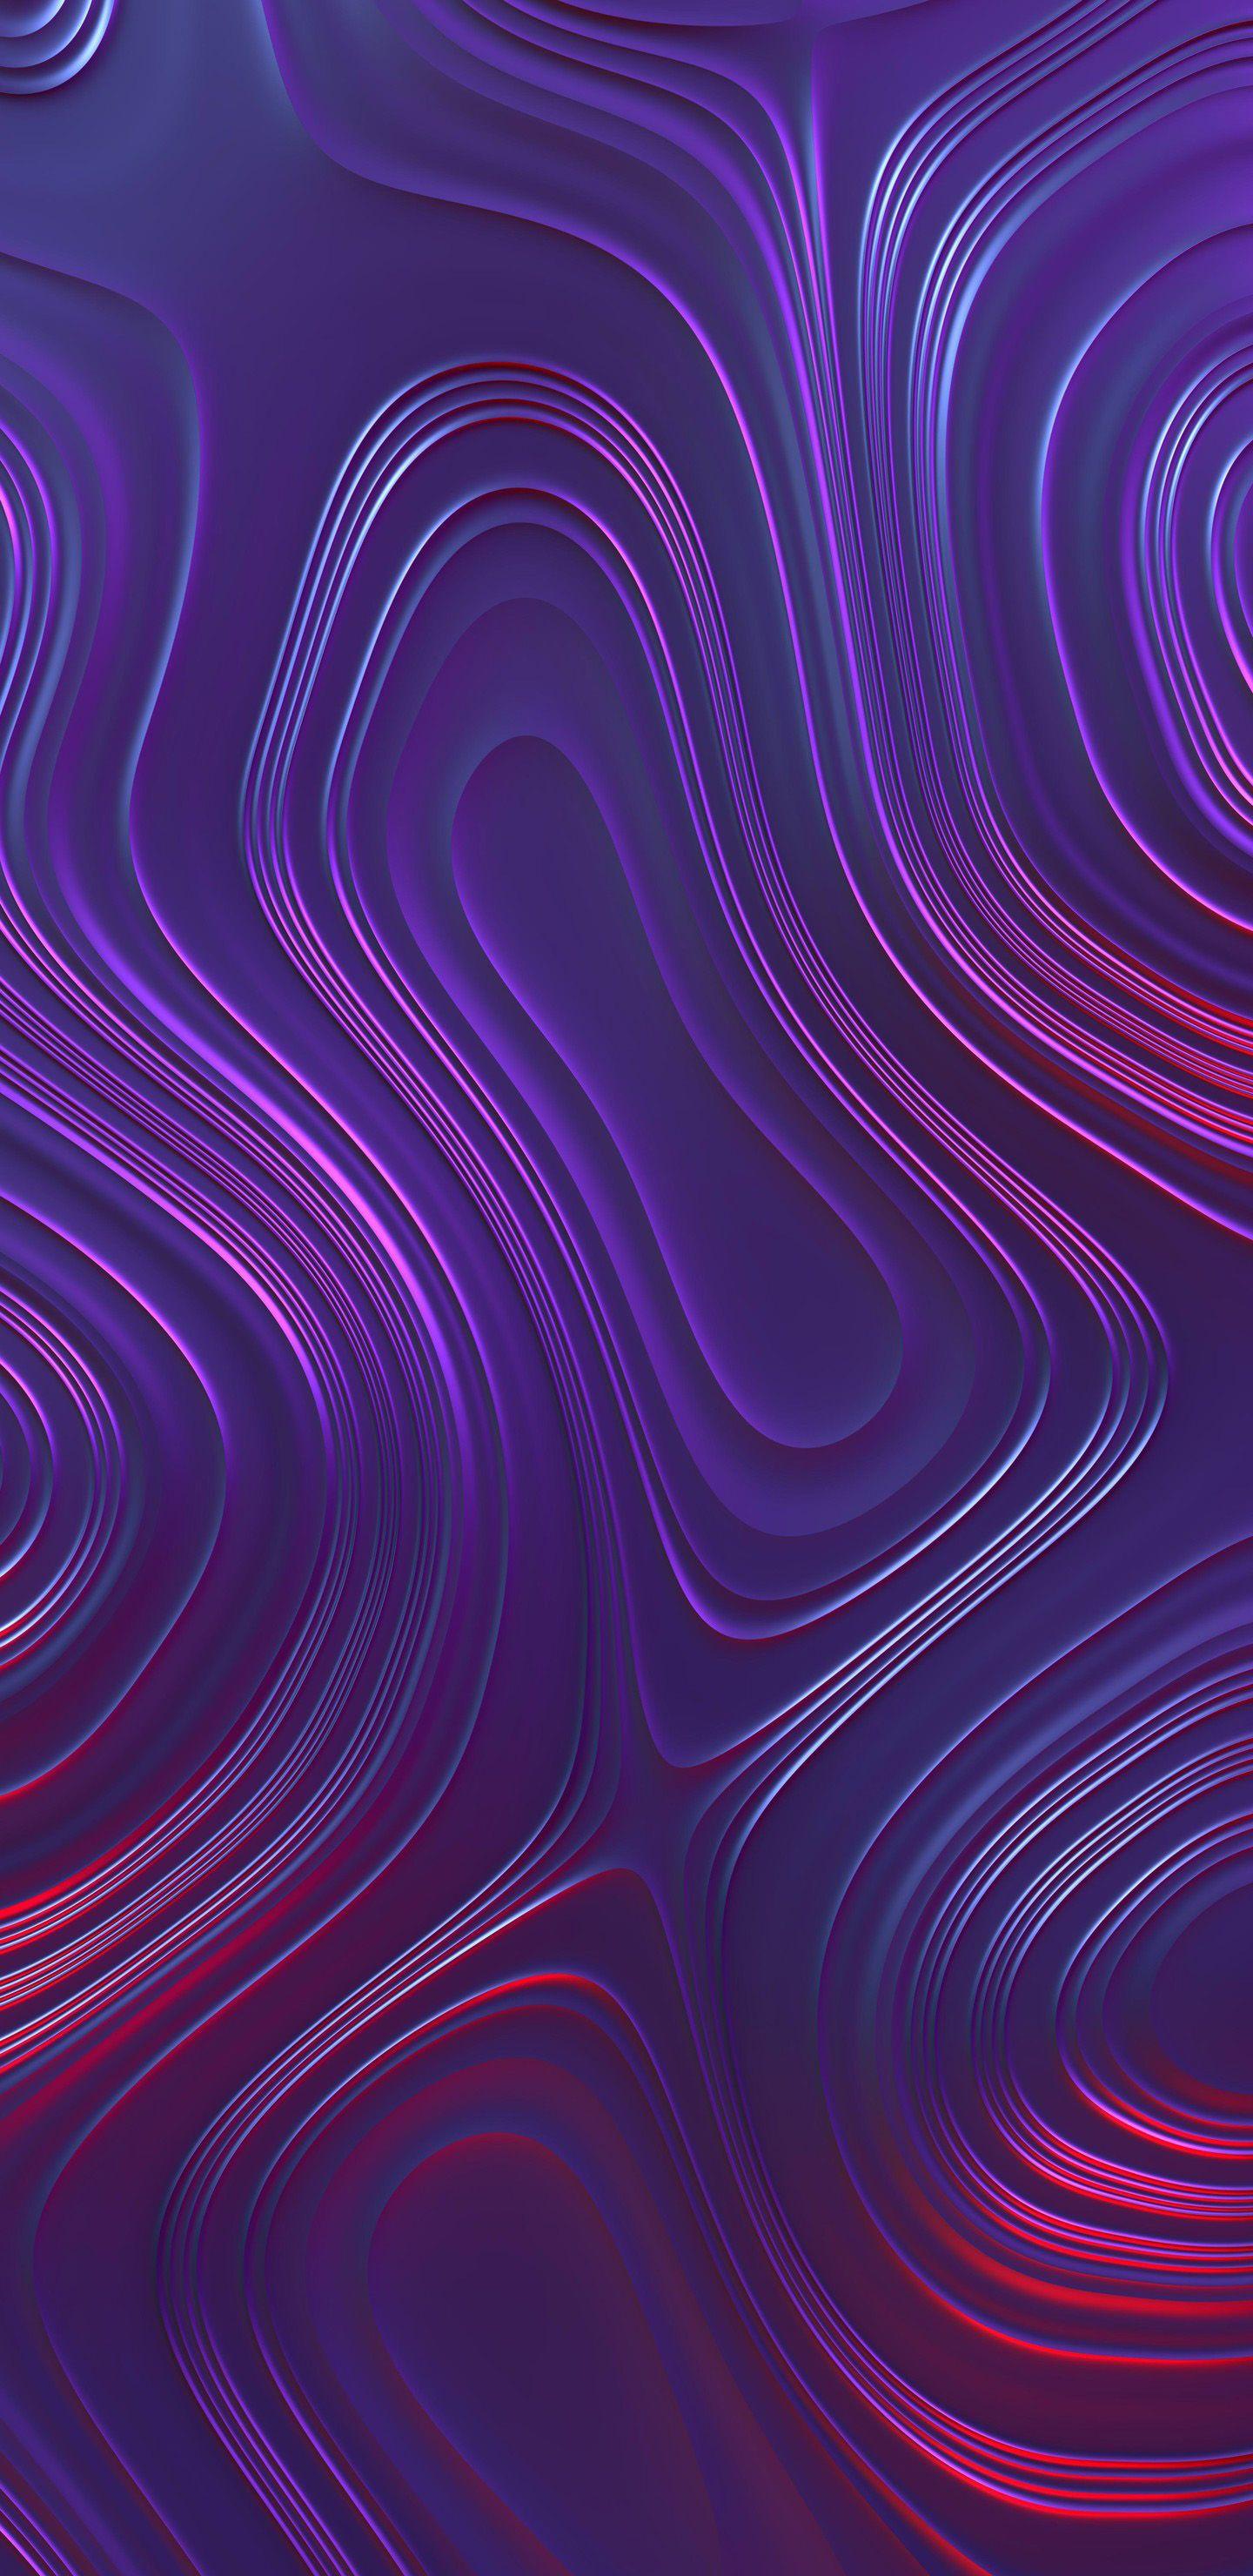 Unique Purple Pattern for Background of Samsung Galaxy S9 and S